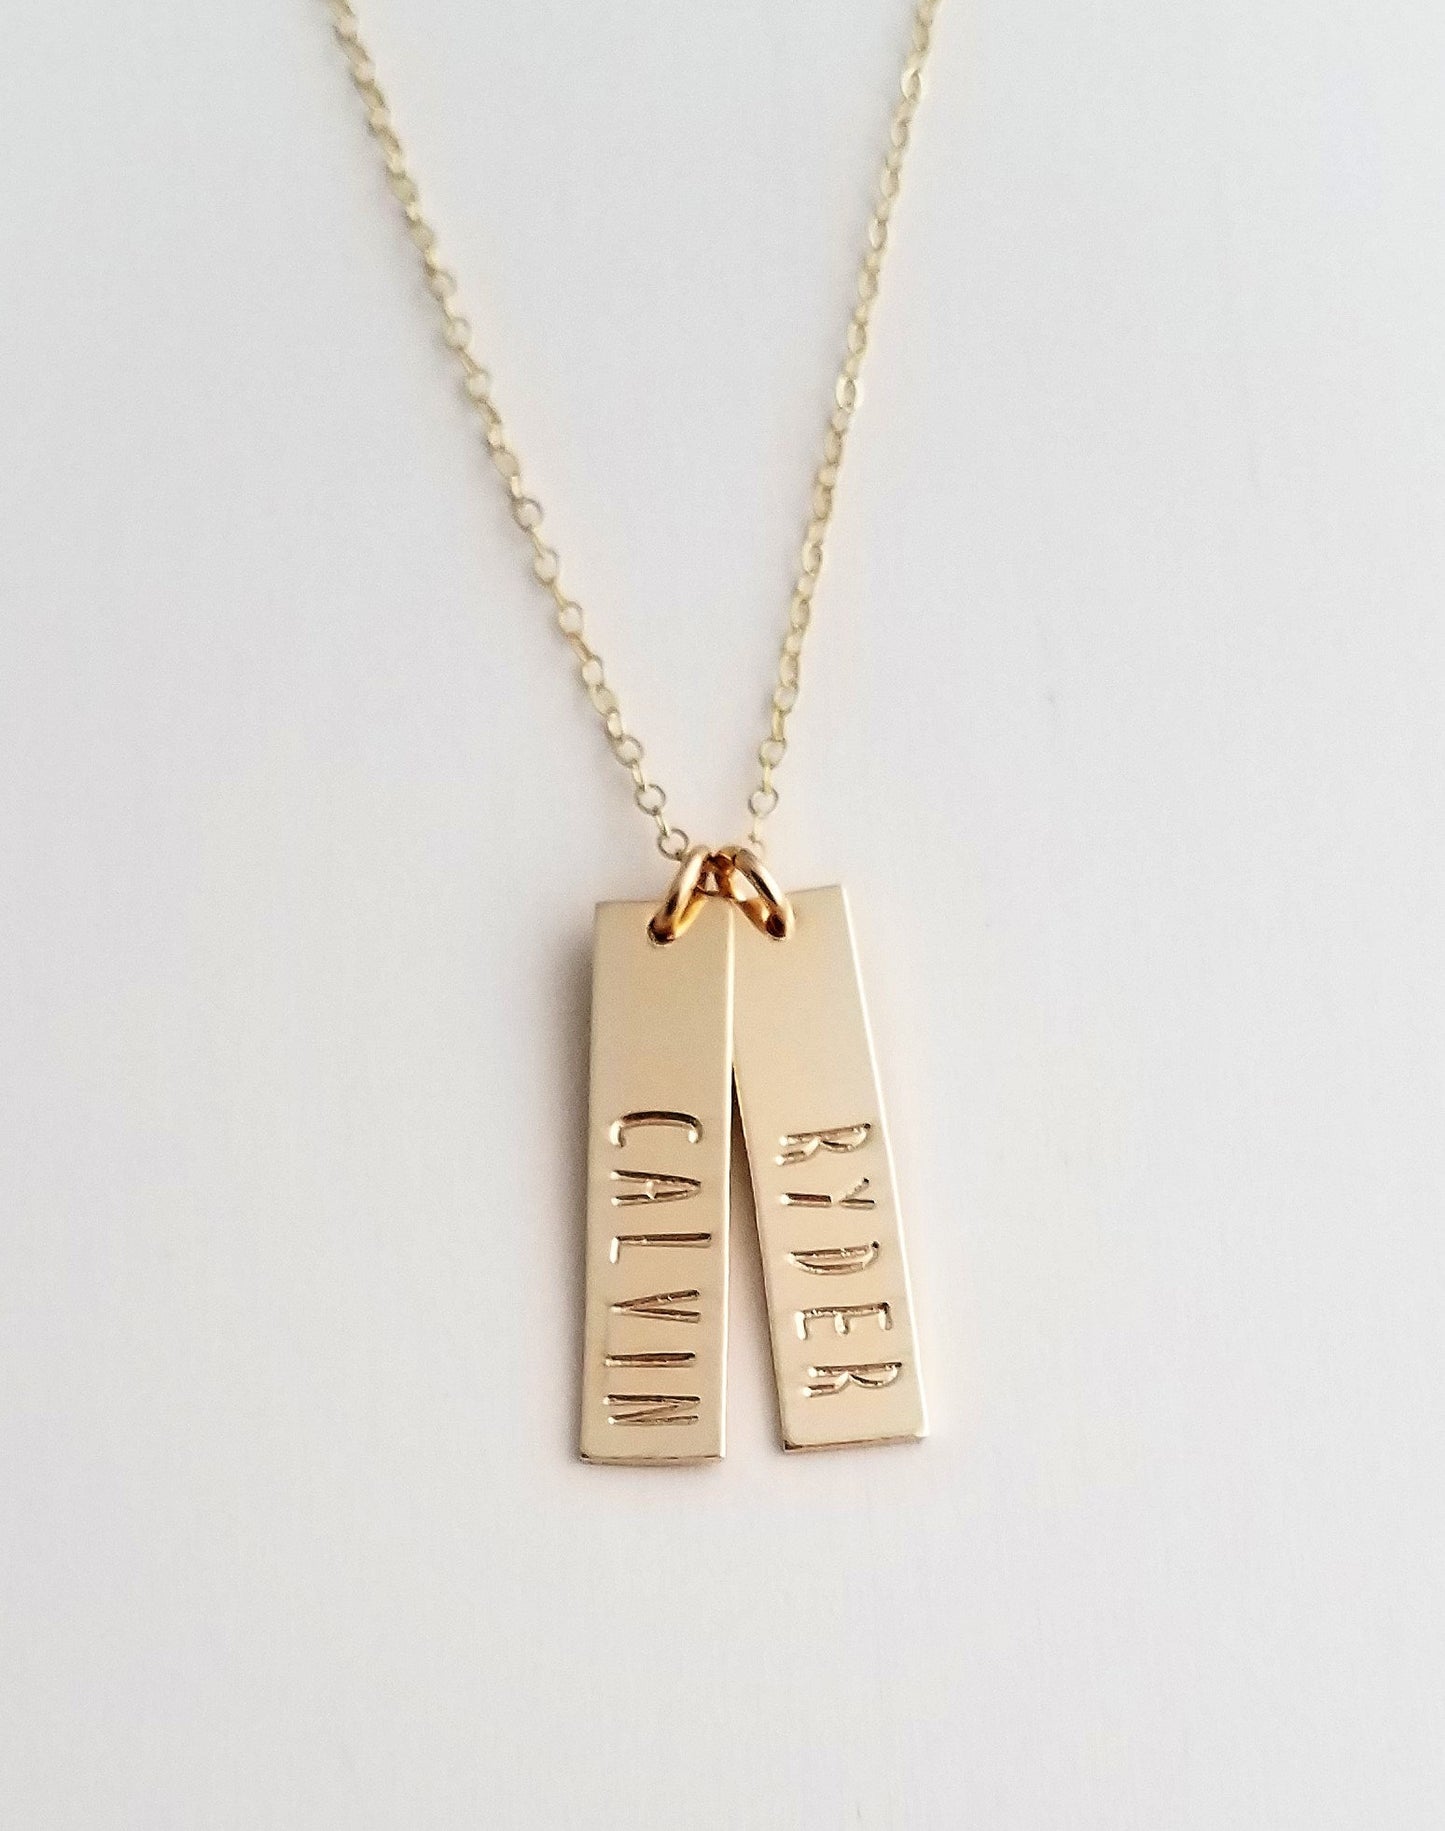 Personalized Gold Bar Name Necklace | Custom Name Necklace | Gold Bar Name Necklace